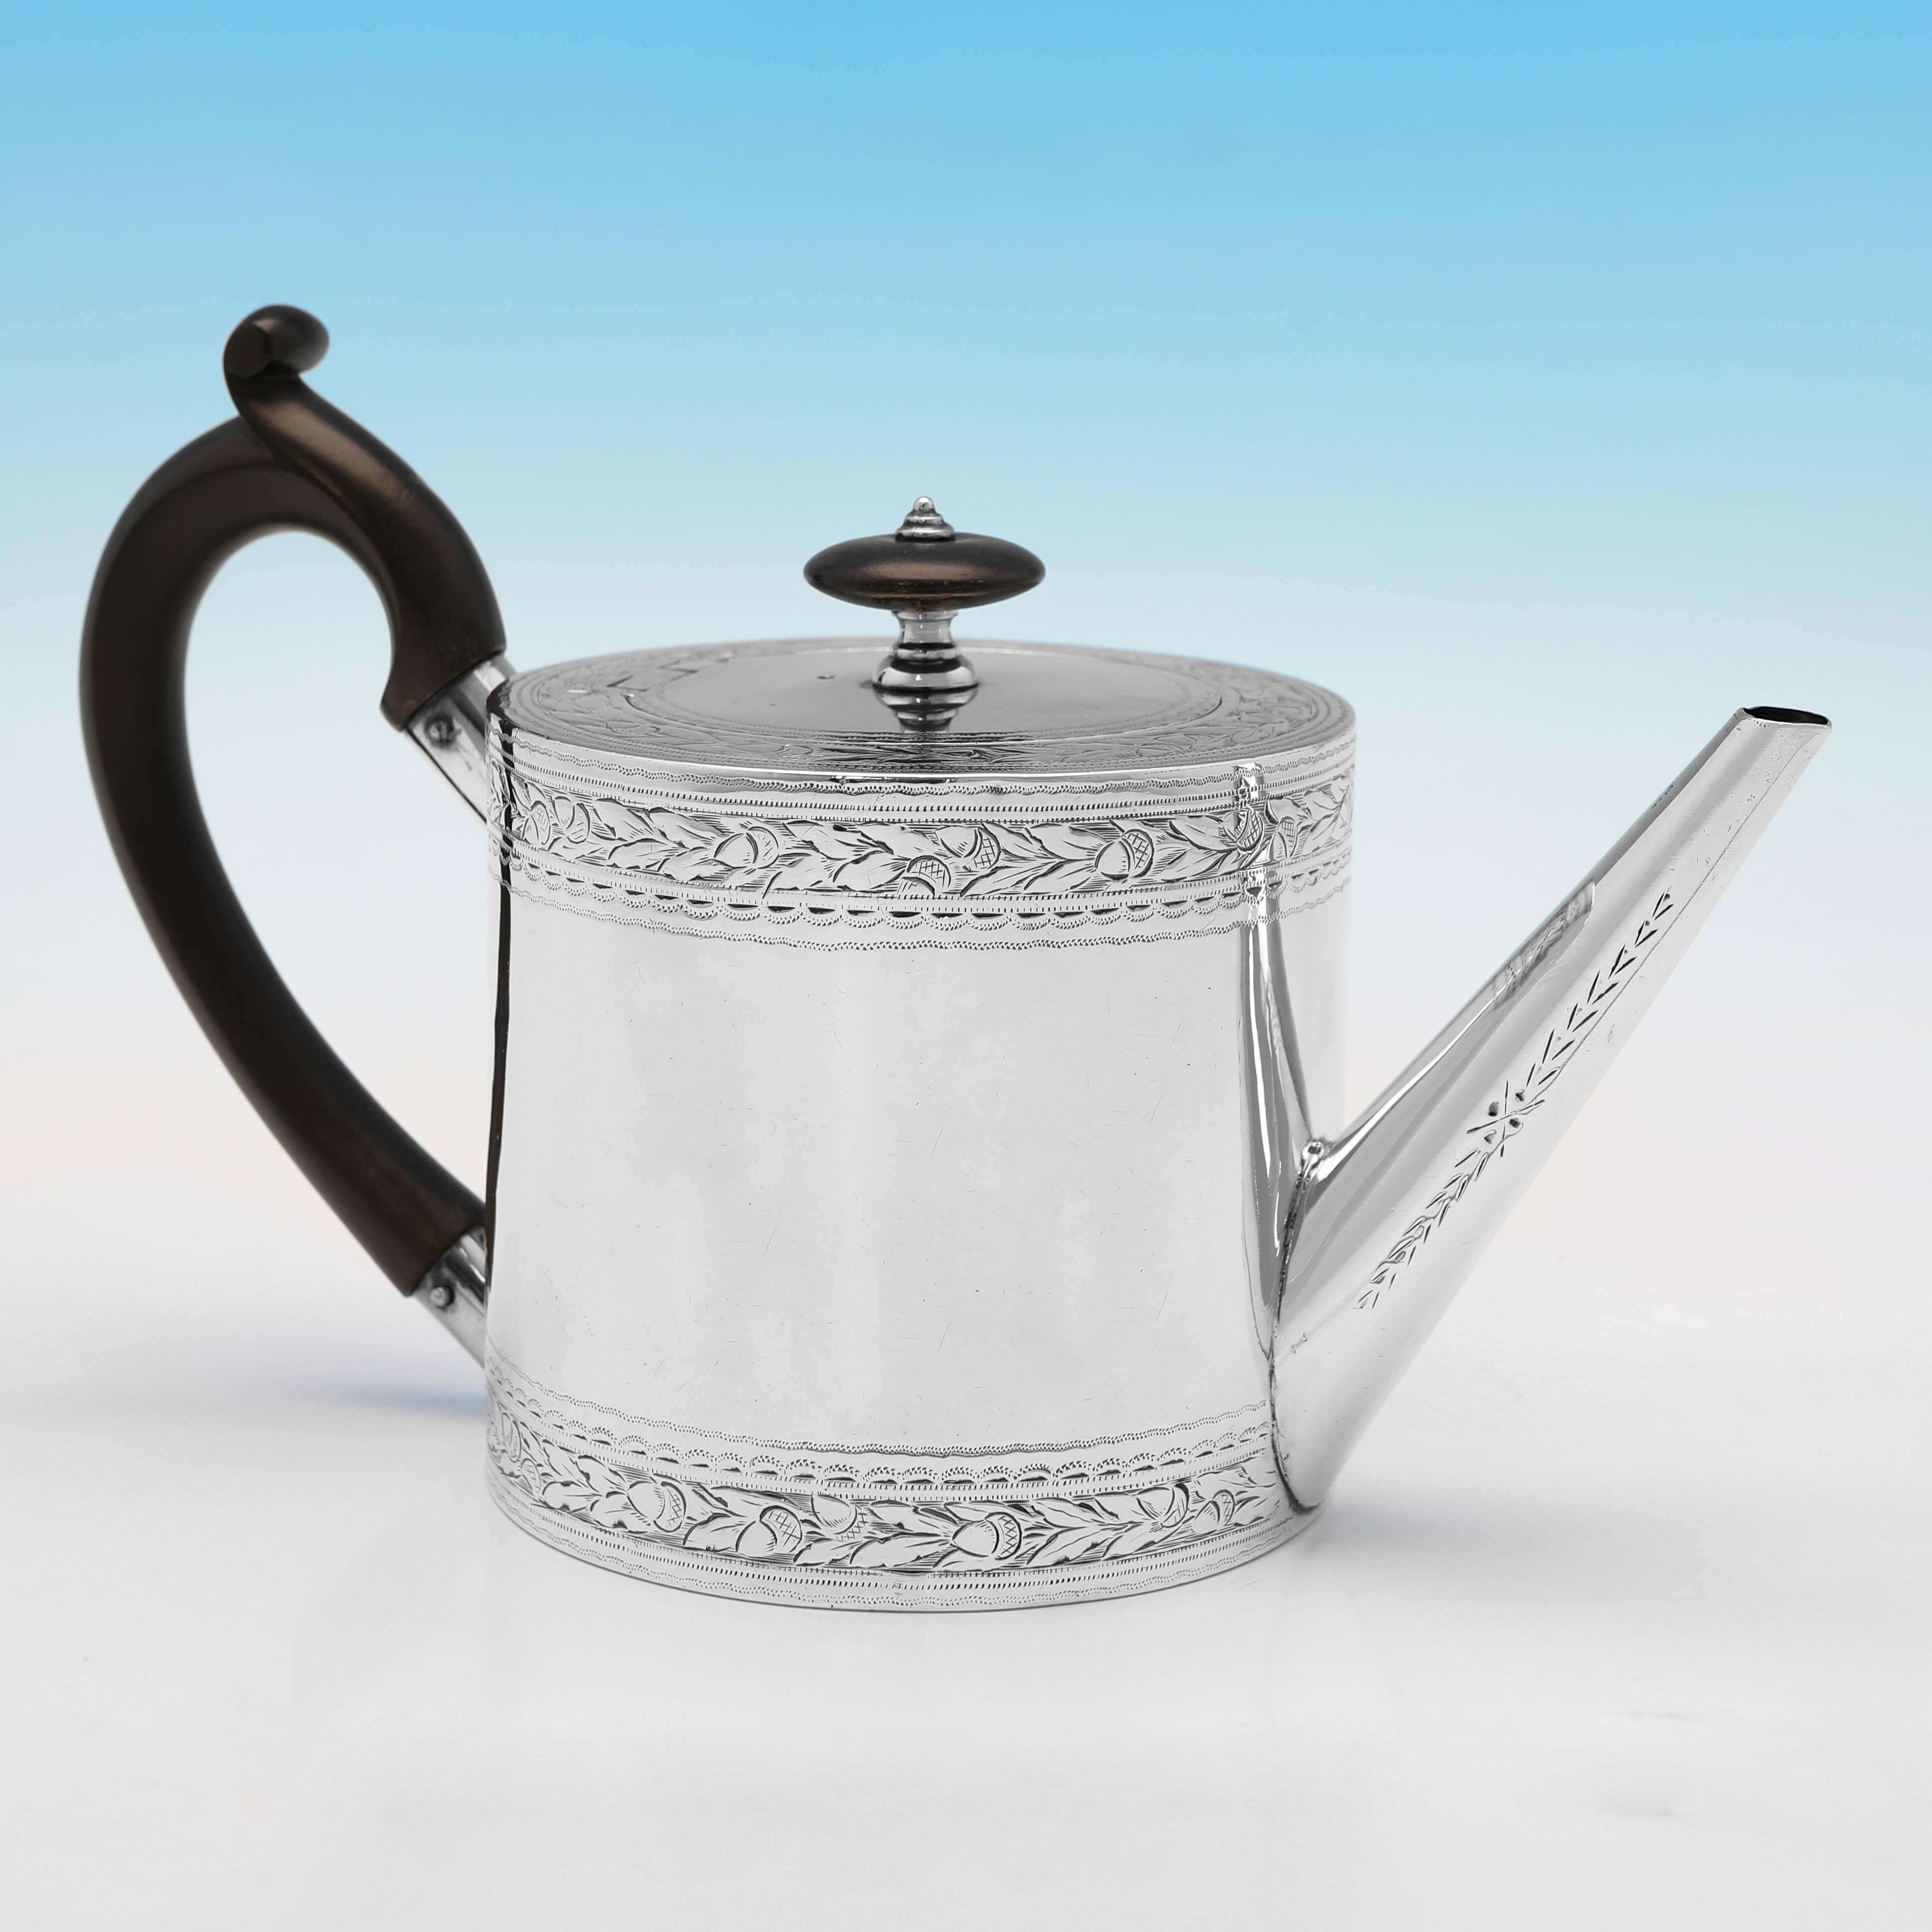 Hallmarked in London in 1798 by John Emes, this attractive, George III, Antique Sterling Silver Teapot, is 'Drum' shaped, and features engraved decoration throughout, and a wooden handle and finial. 

The teapot measures 4